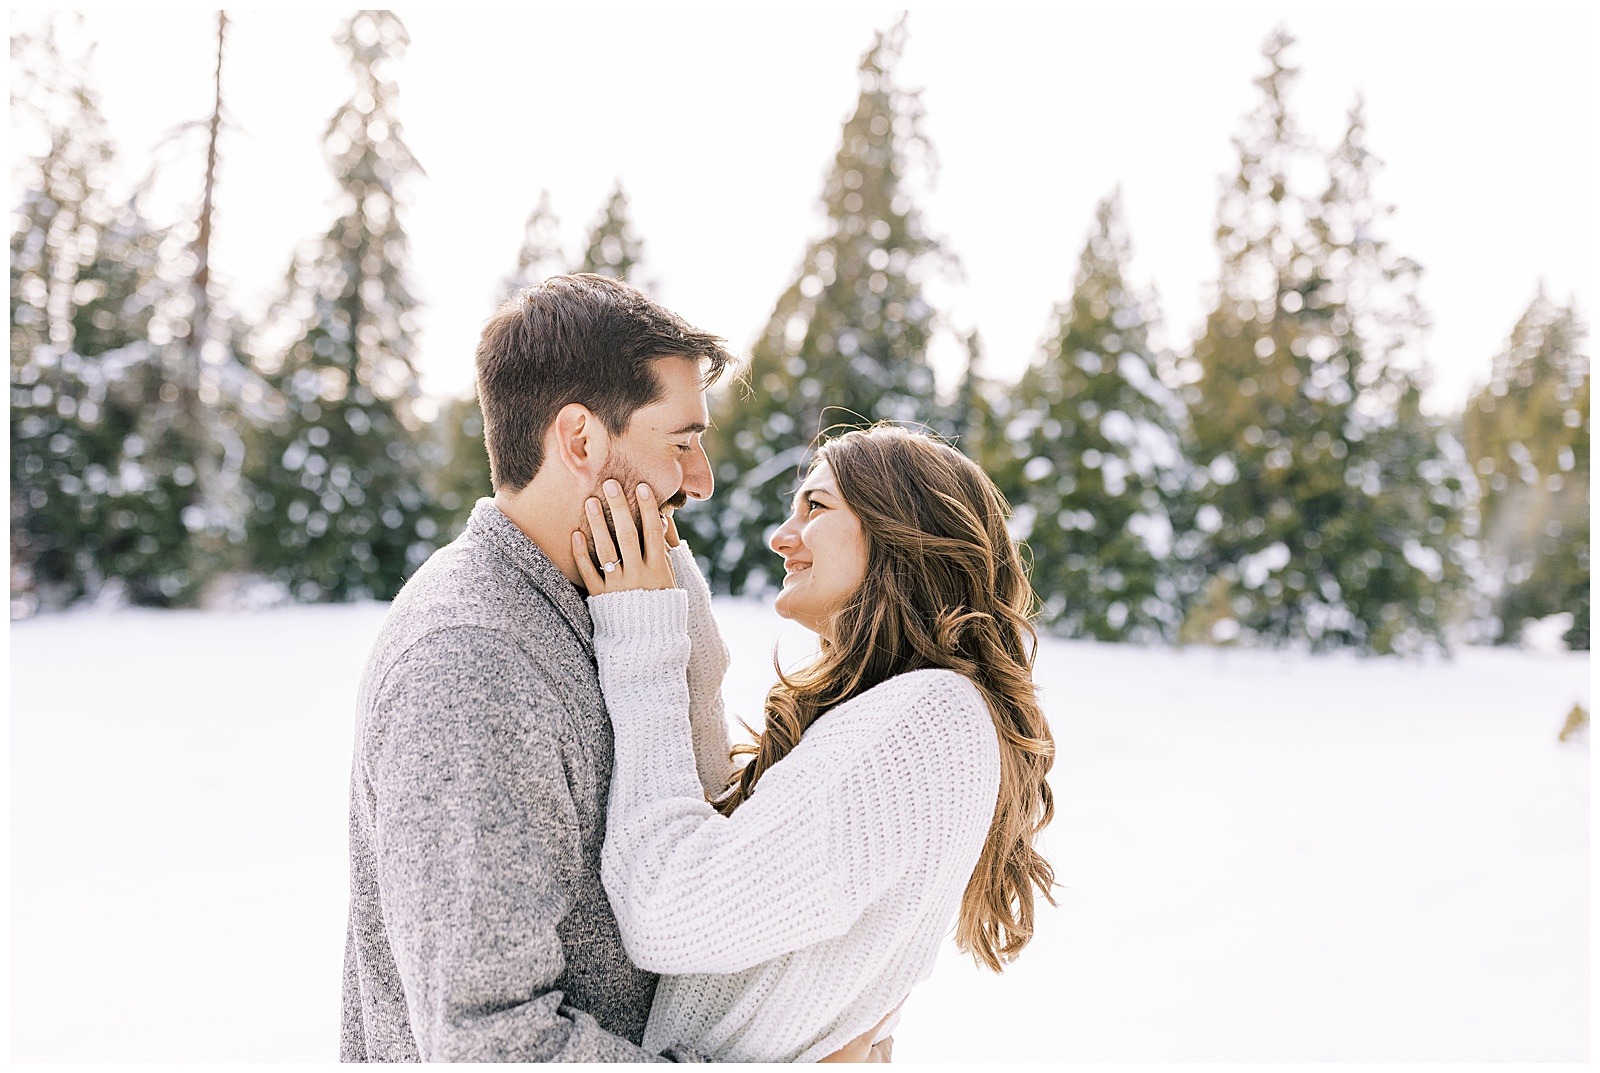 engaged couple embracing almost kissing in snow fresno wedding photographer megan helm 